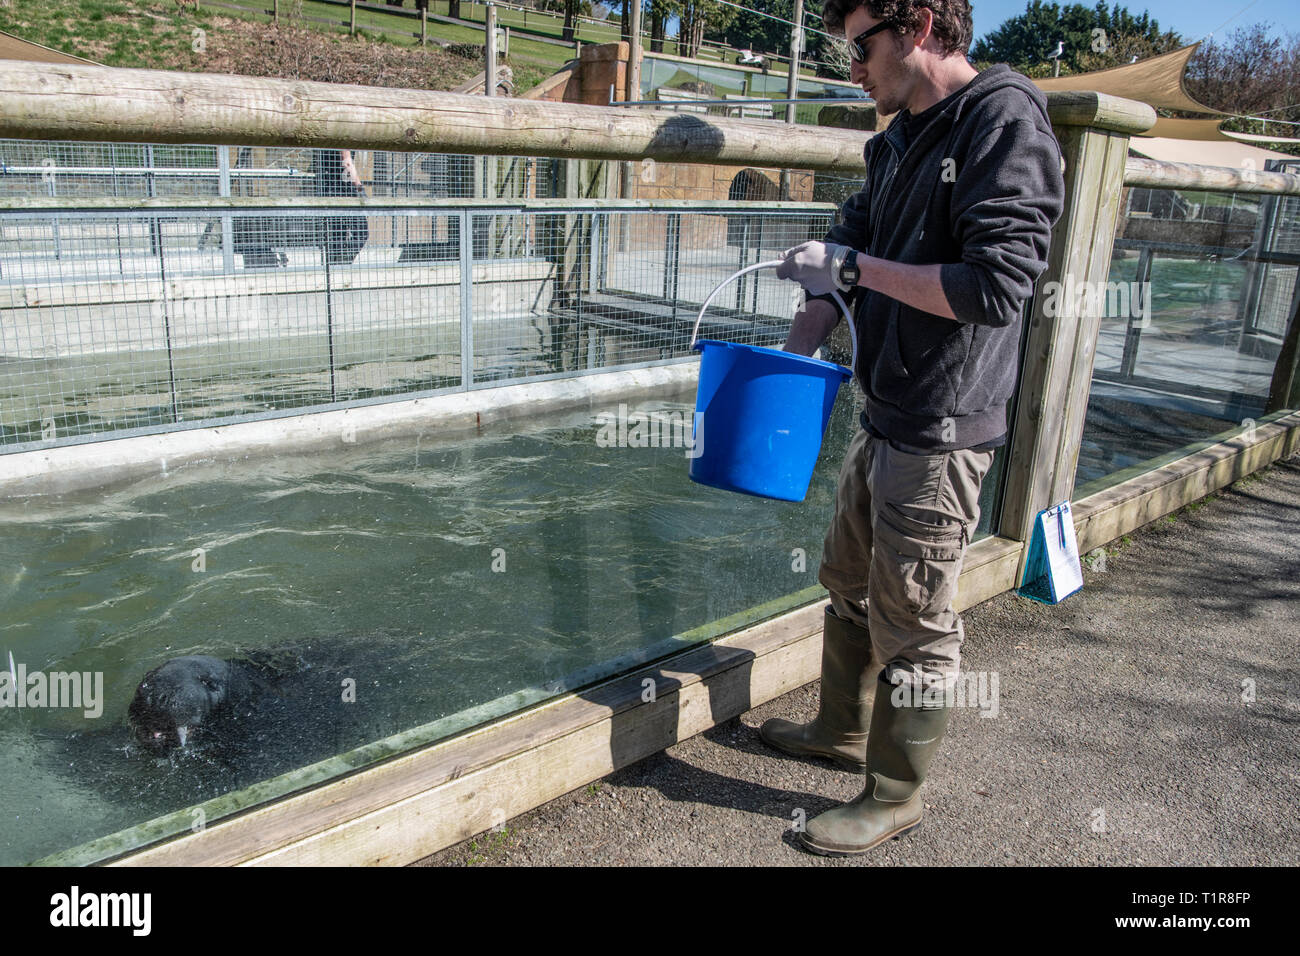 Cornish Seal Sanctuary, Gweek, Cornwall, UK. 28th Mar, 2019. Rescued grey seal Stevie affected by the uncertainty around Brexit. Joe More feeding Steve the seal Stevie’s pool refurbishment was going to take around 6 weeks to complete and is due to be ready on the 28th March as no one was prepared to take any chances to move Stevie any later than the planned Brexit ruling date! If the Pool is not ready before the Brexit date, there are many issues that would mean Stevie would not be able to return back to his home in Belgium. Credit: kathleen white/Alamy Live News Stock Photo